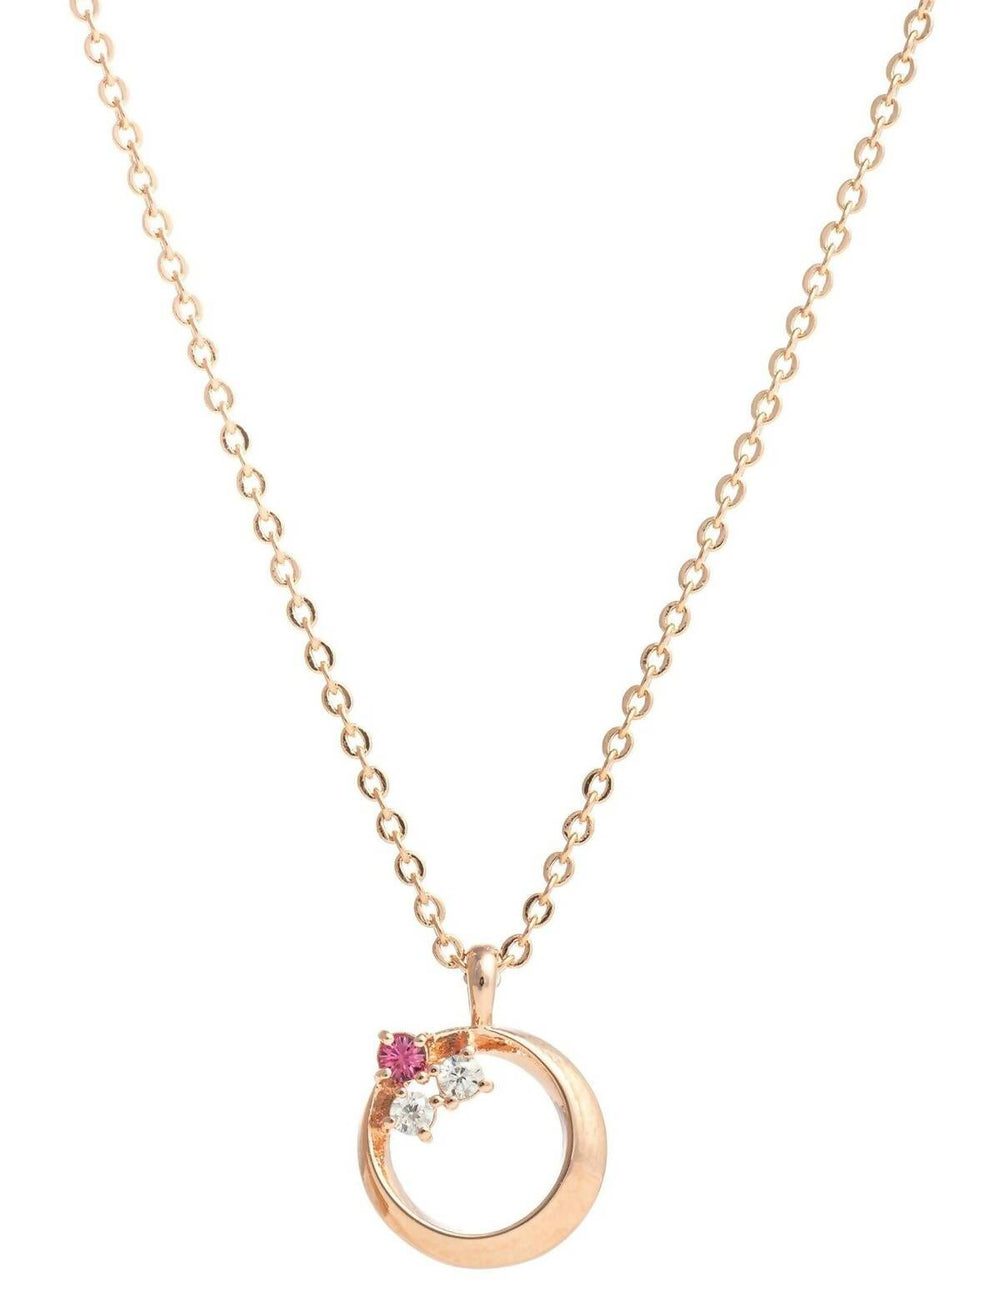 Astra- A Dainty Pendant with Crystals made with Swarovski Elements Pendants Forest Jewelry Rose 